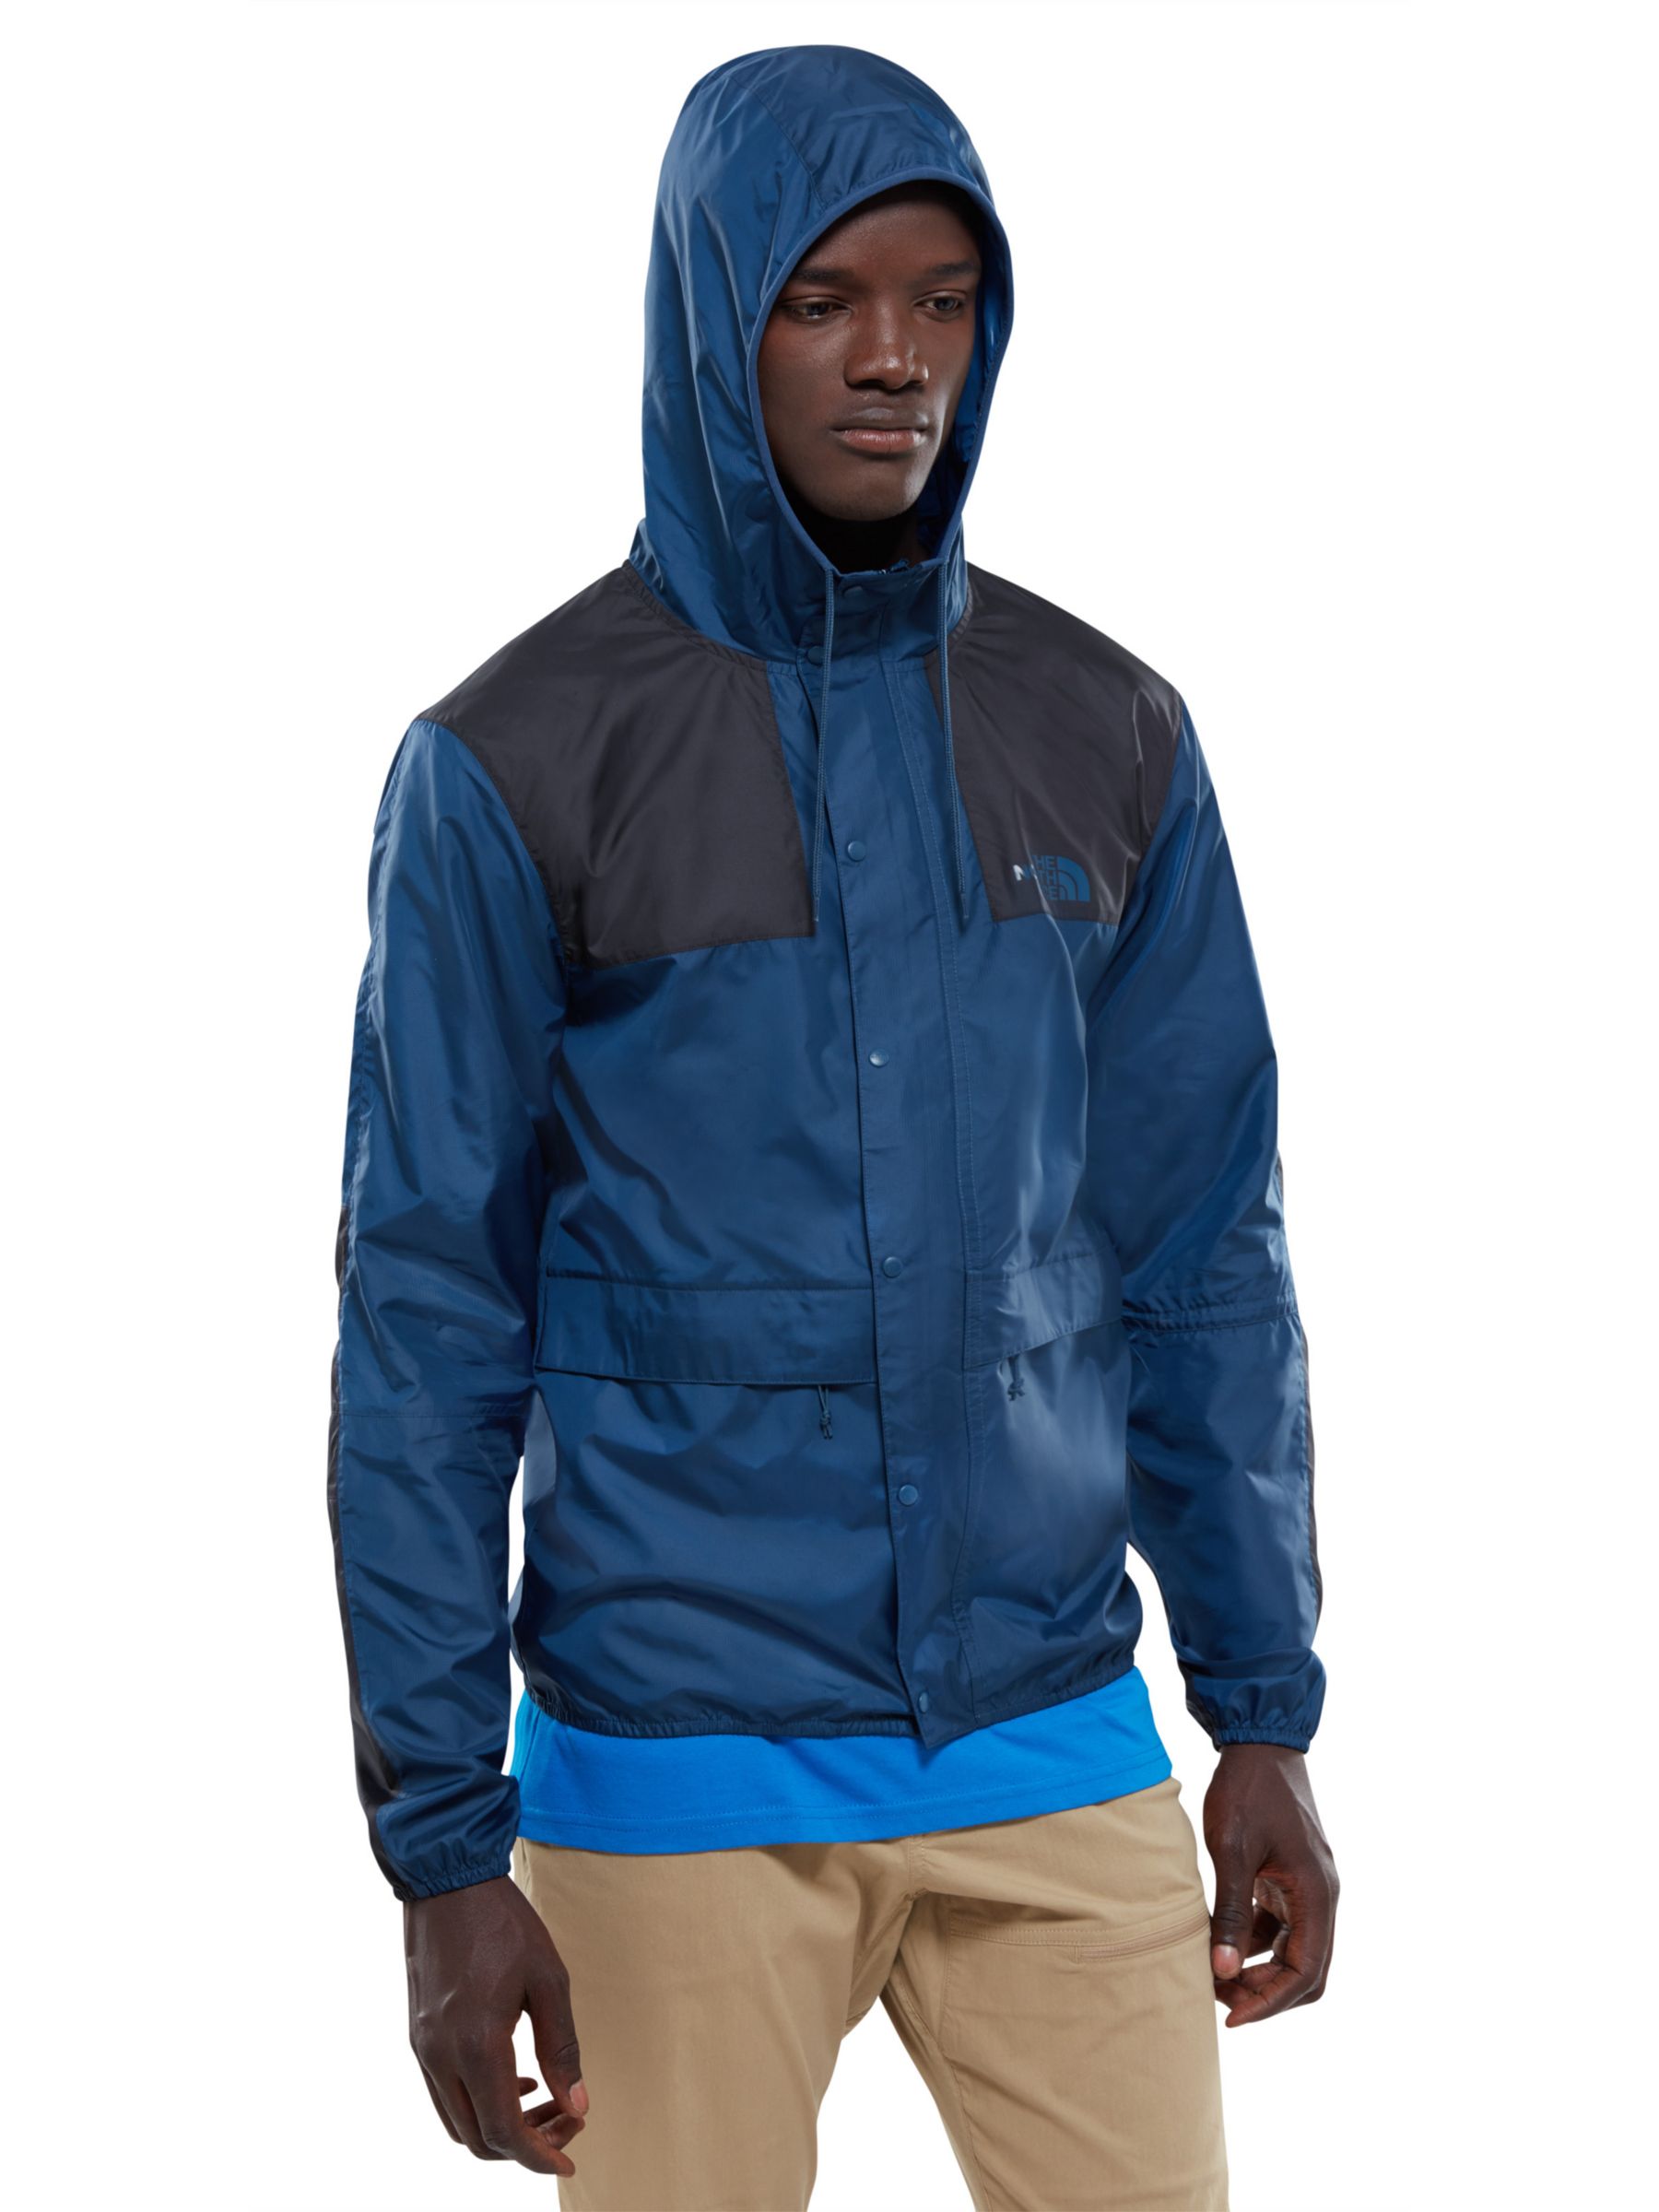 north face 1985 mountain jacket blue